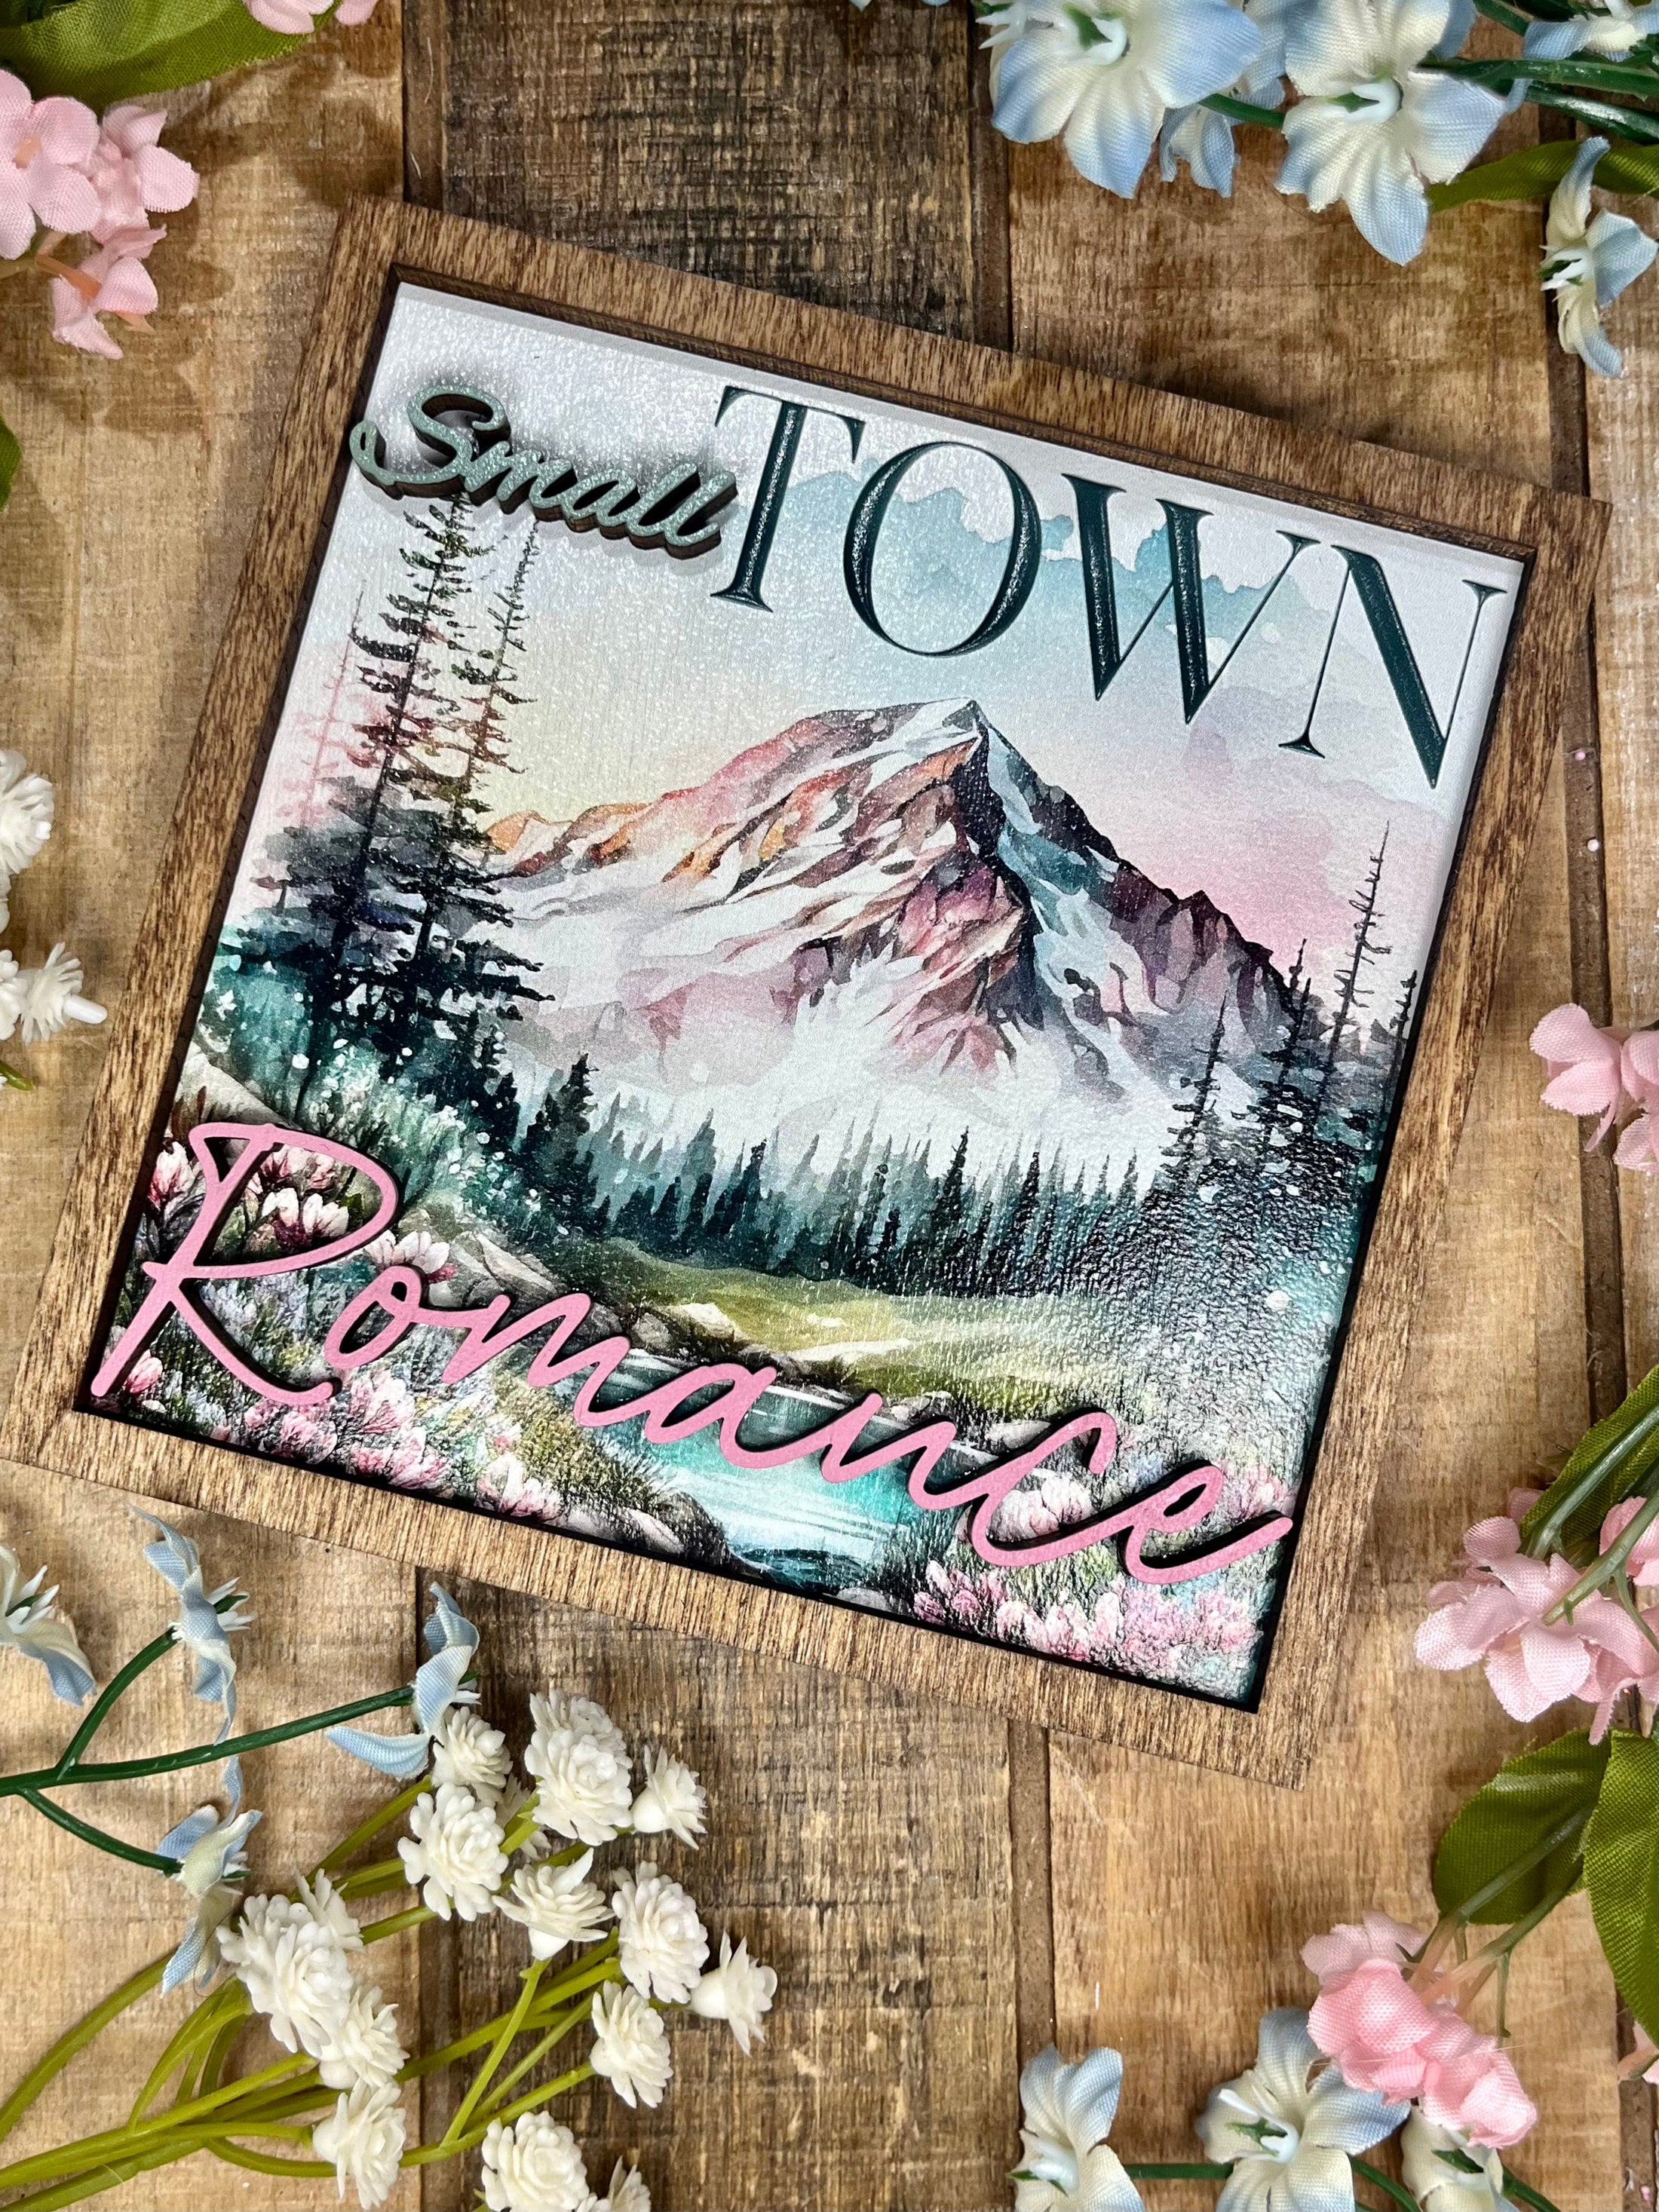 Small Town Romance Sign FireDrake Artistry™